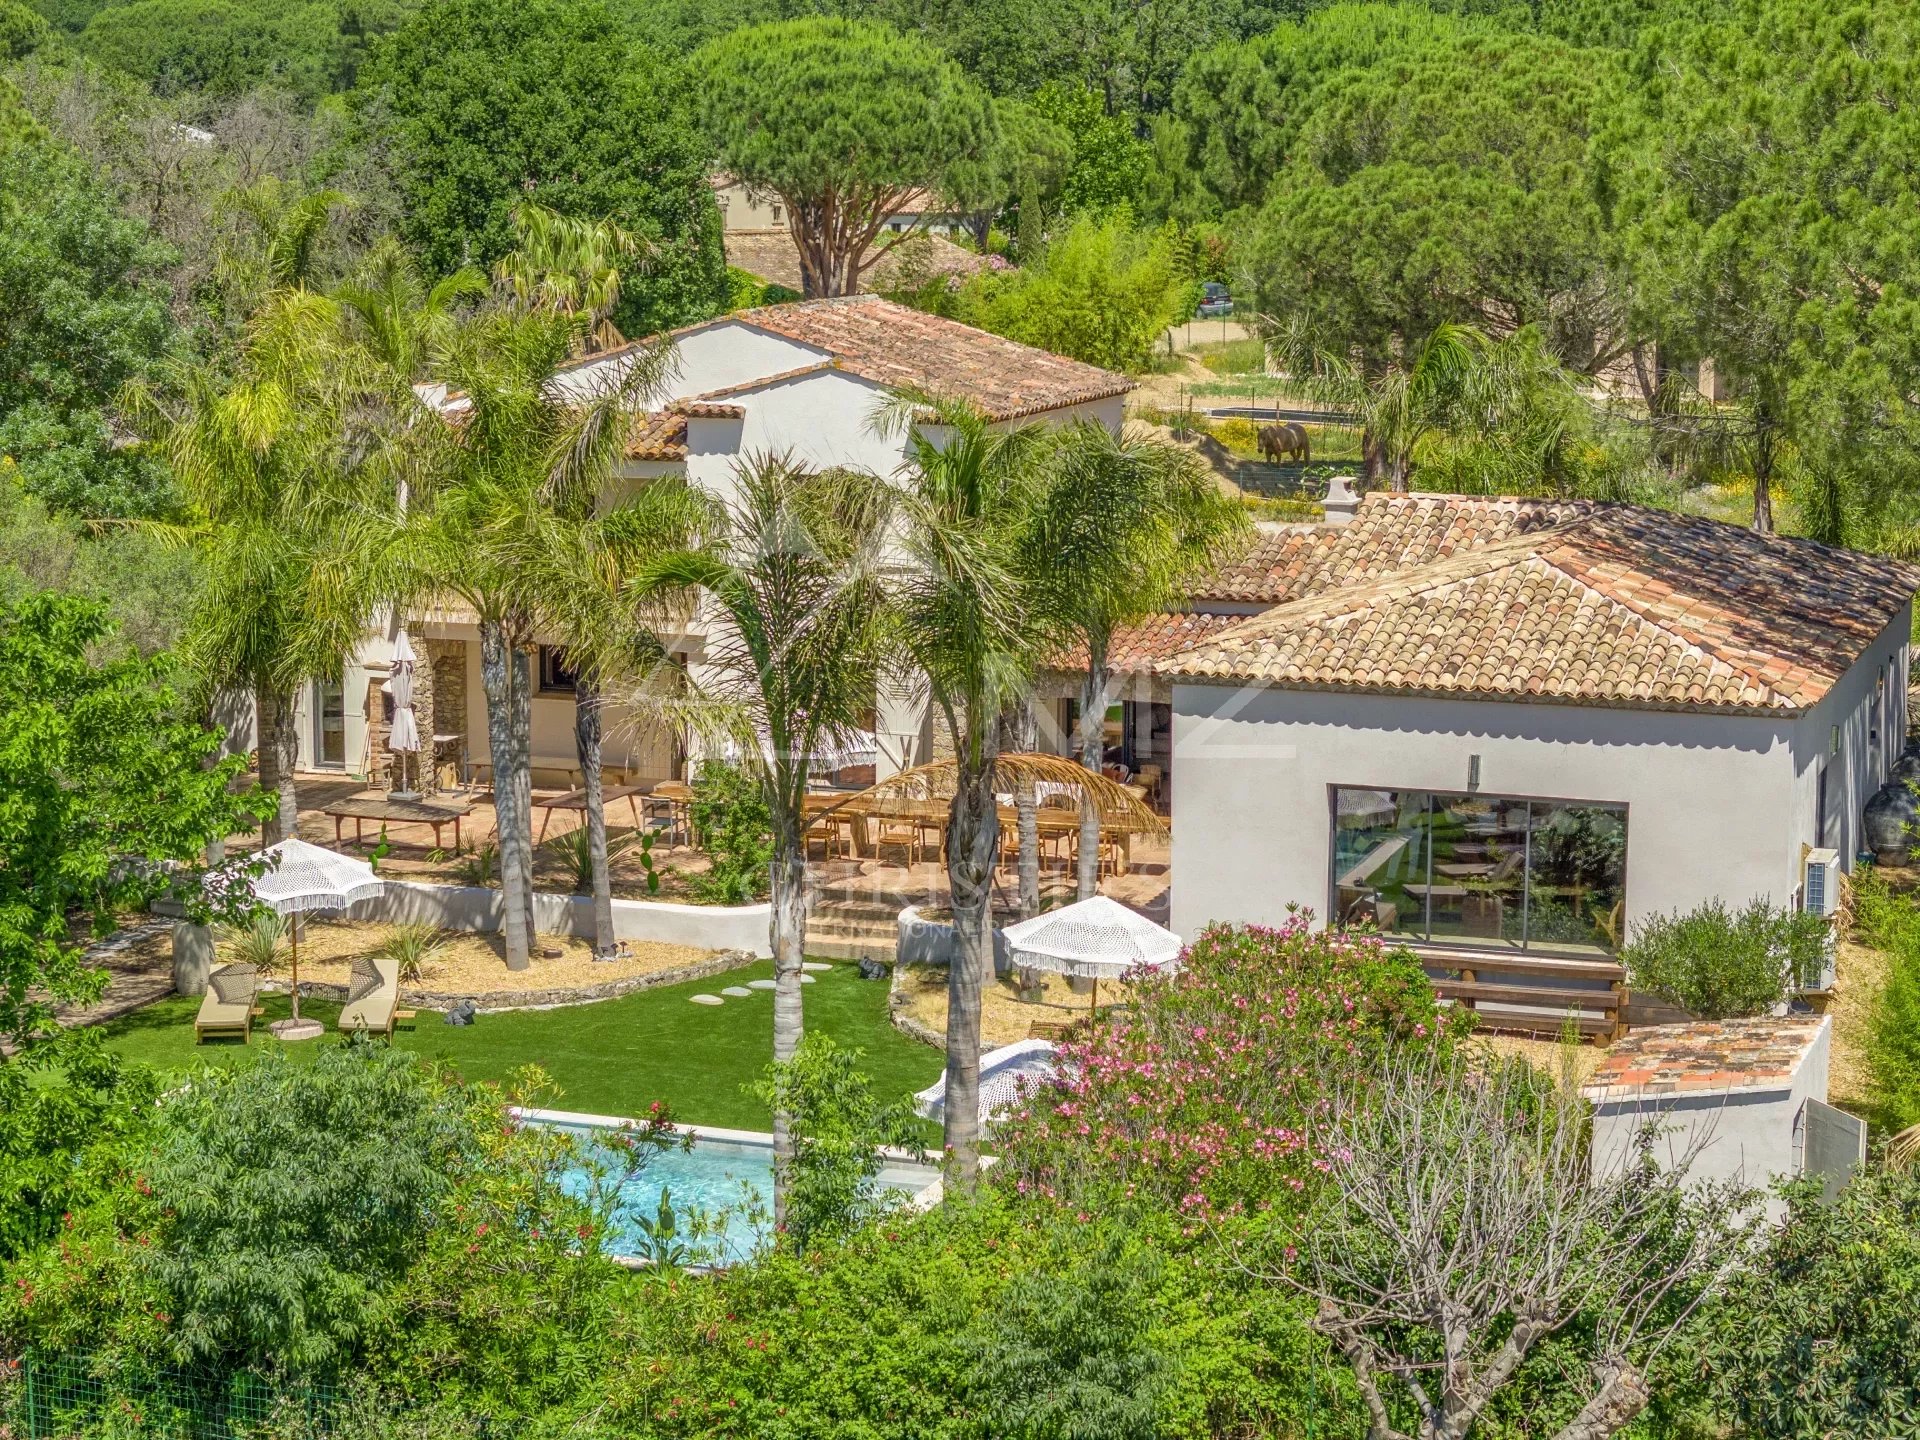 VILLA WITH CHARACTER - VIEW OF GRIMAUD CASTLE